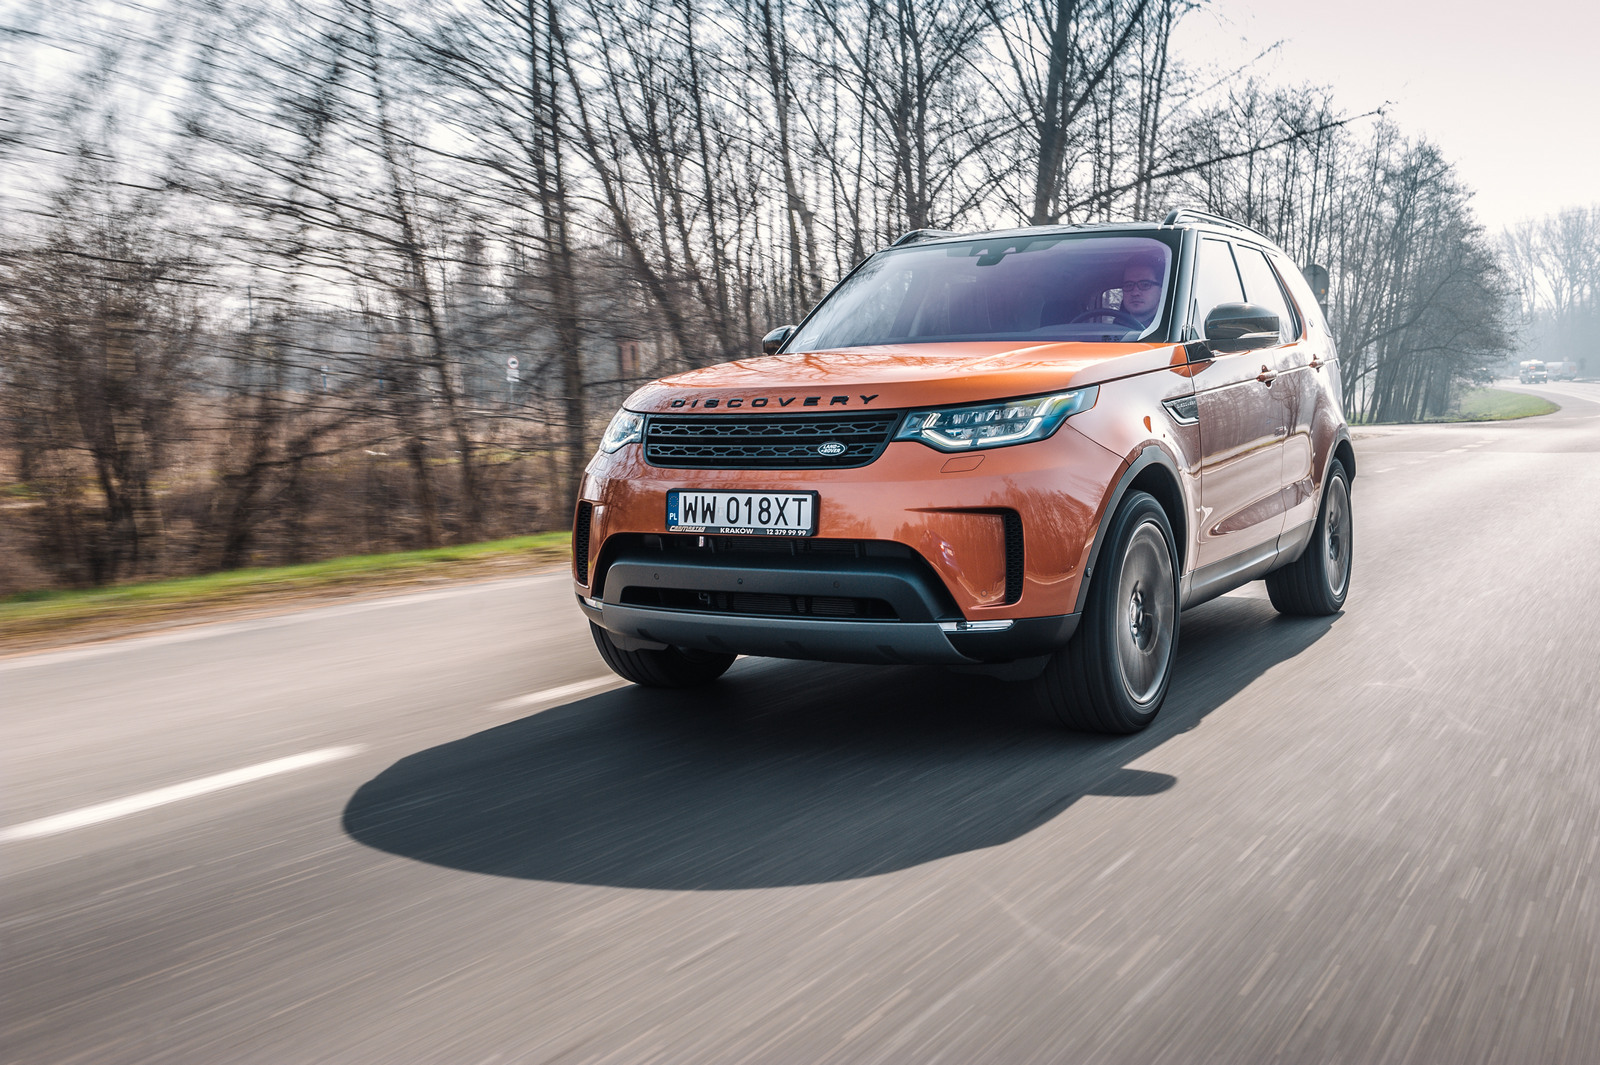 Nowy Land Rover Discovery (2017) TEST i OPINIA Dane